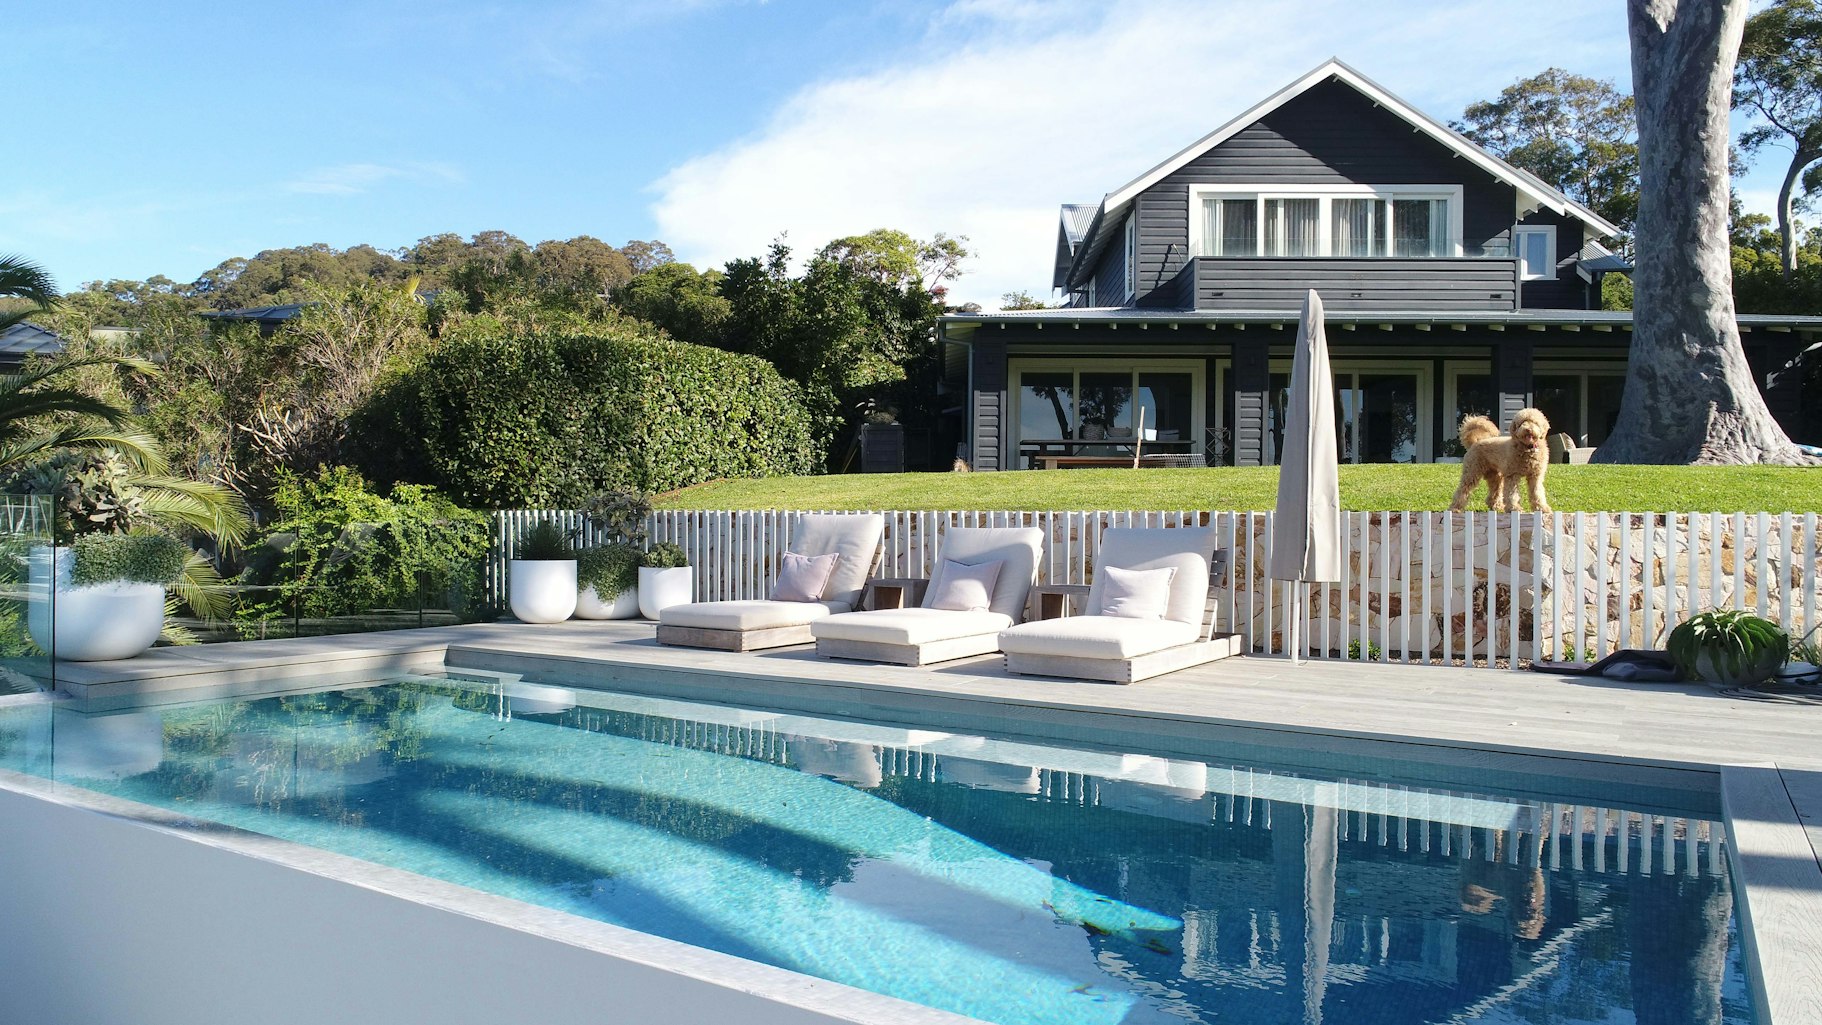 Products-Pool pool-tiles-devonport-lodge-themahonygroup-bayyview-5